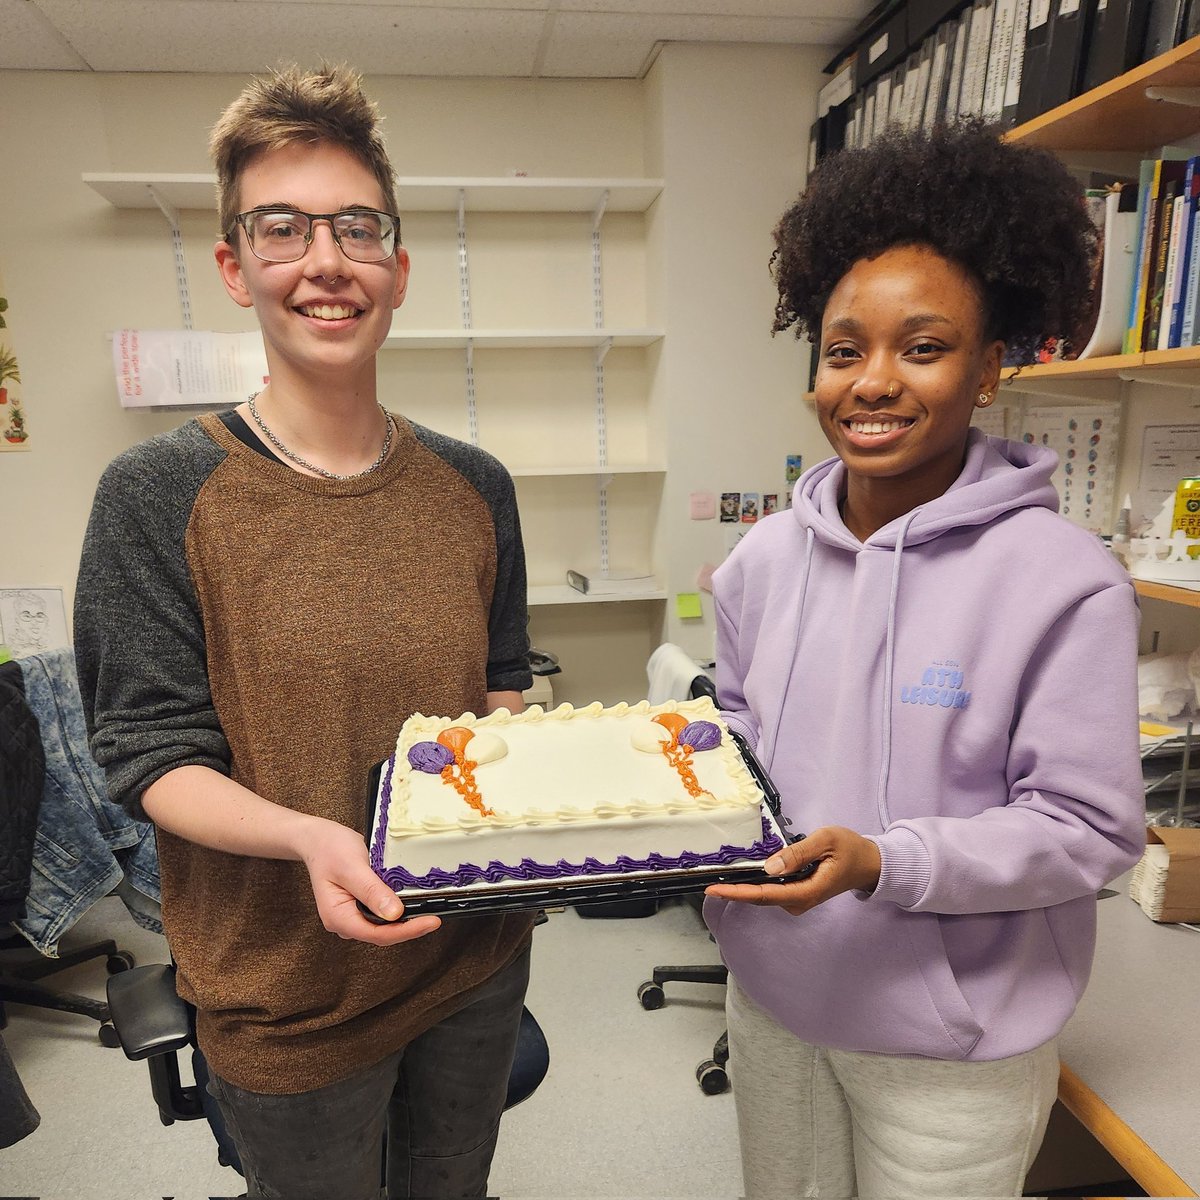 Congratulations to Jasmyn and Vinou who both successfully defended their PhD proposals today, officially becoming PhD candidates! Now, to get to work on their thesis research! @NUTrypkiller